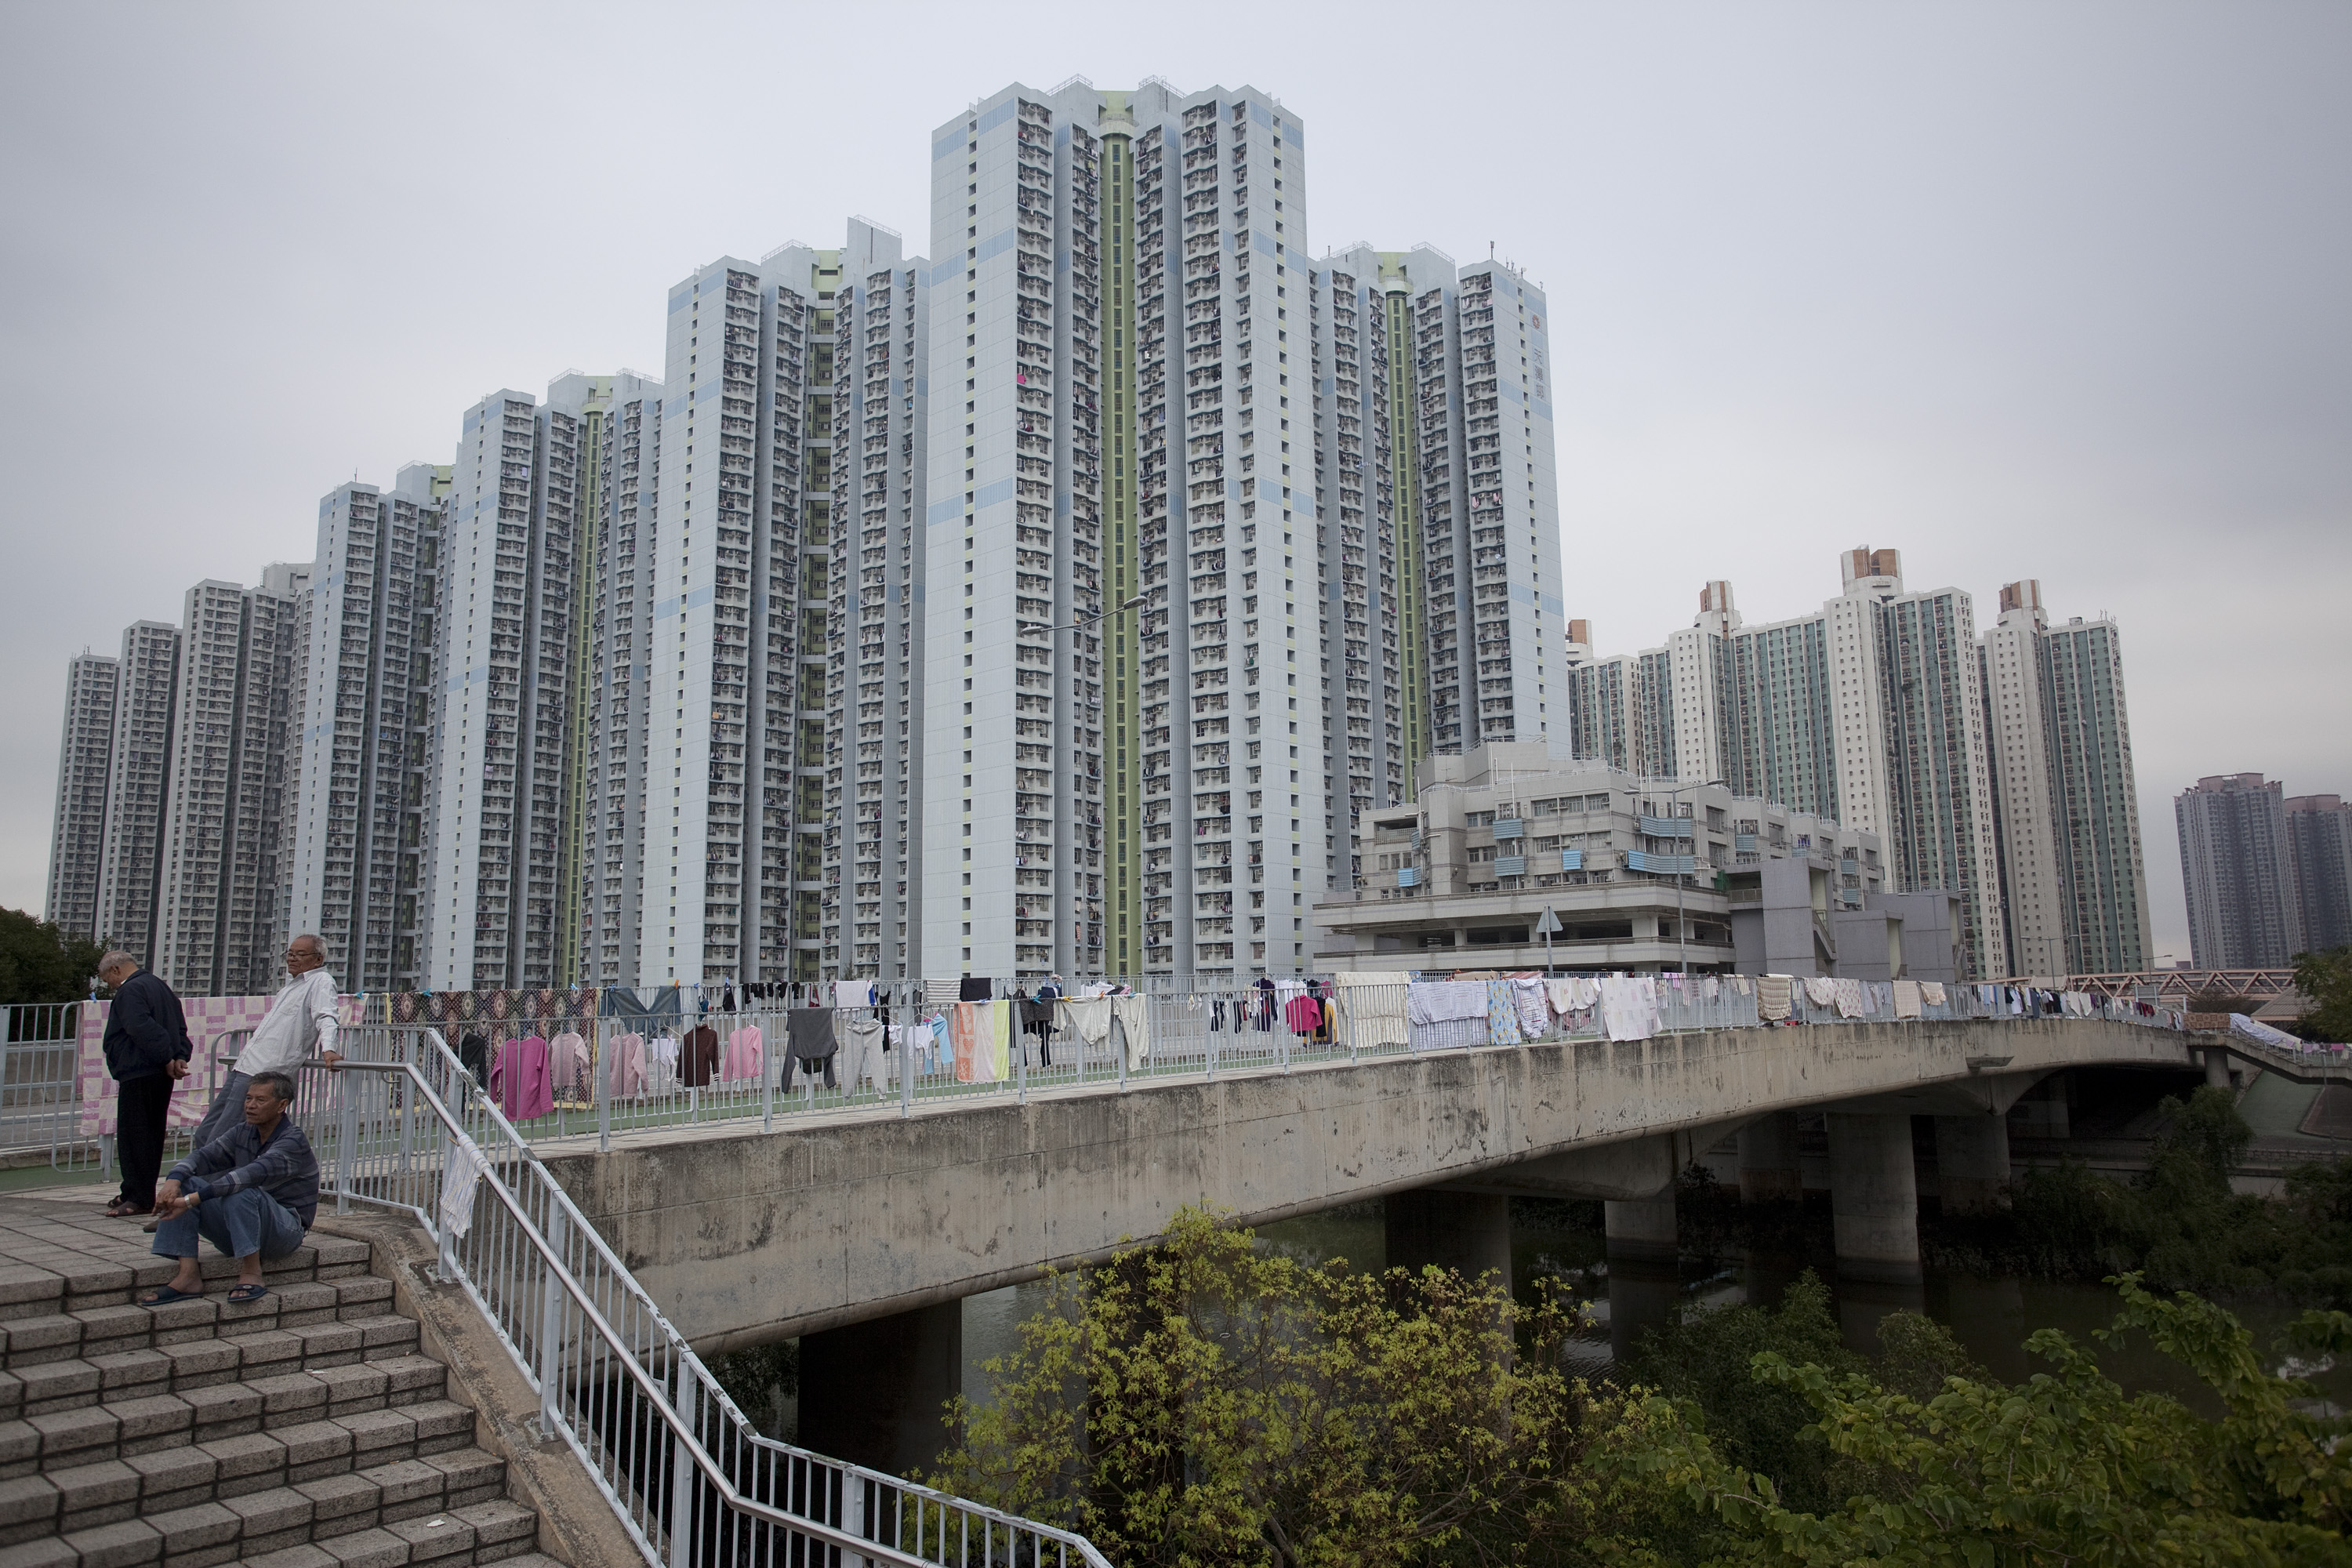 Residential buildings stand in the Tin Shui Wai area in Hong Kong, China, on Saturday, March 3, 2012. The number of housing deals in Hong Kong rose for the first time in four months in February even as the total value of those transactions fell, signaling an improvement in sentiment among buyers of small-sized apartments. Photographer: Jerome Favre/Bloomberg